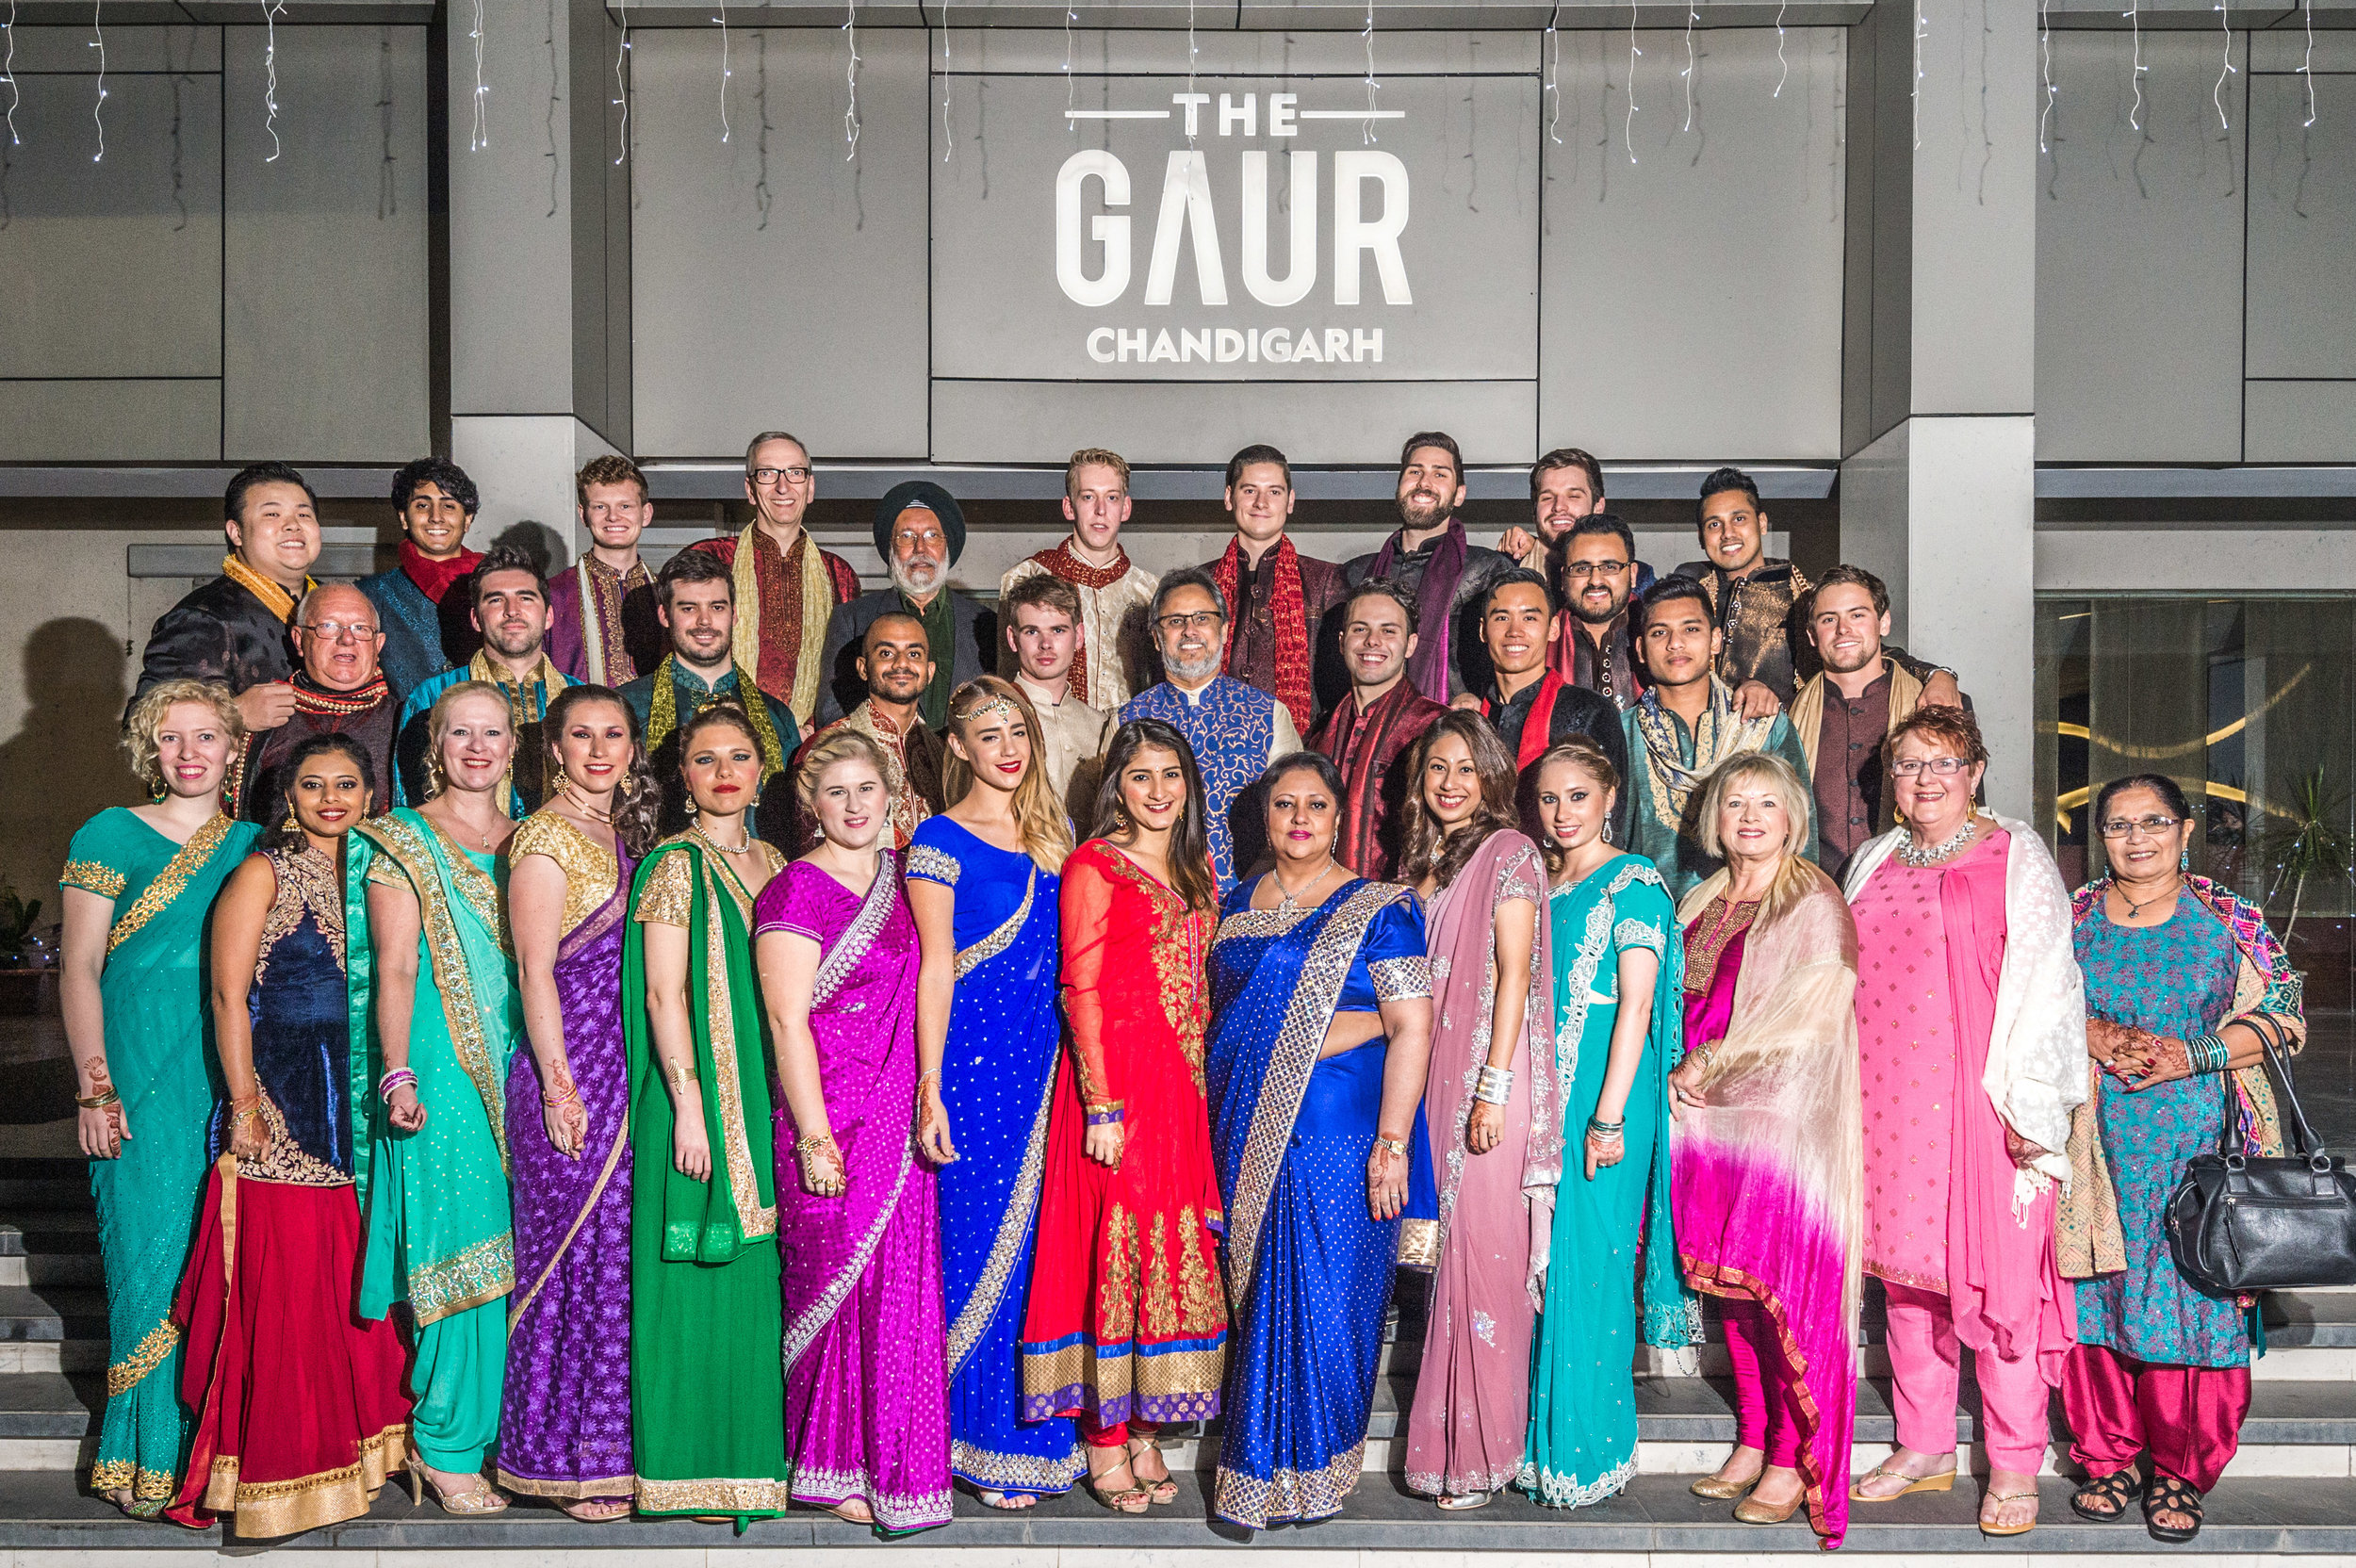  The international contingent of guests who flew into India for this wedding. Just look at how beautifully the ladies are in their lehenga, ghagra cholis, salwar kameez and saris while the gentlemen are clad in their kurta pyjamas as well as sherwani